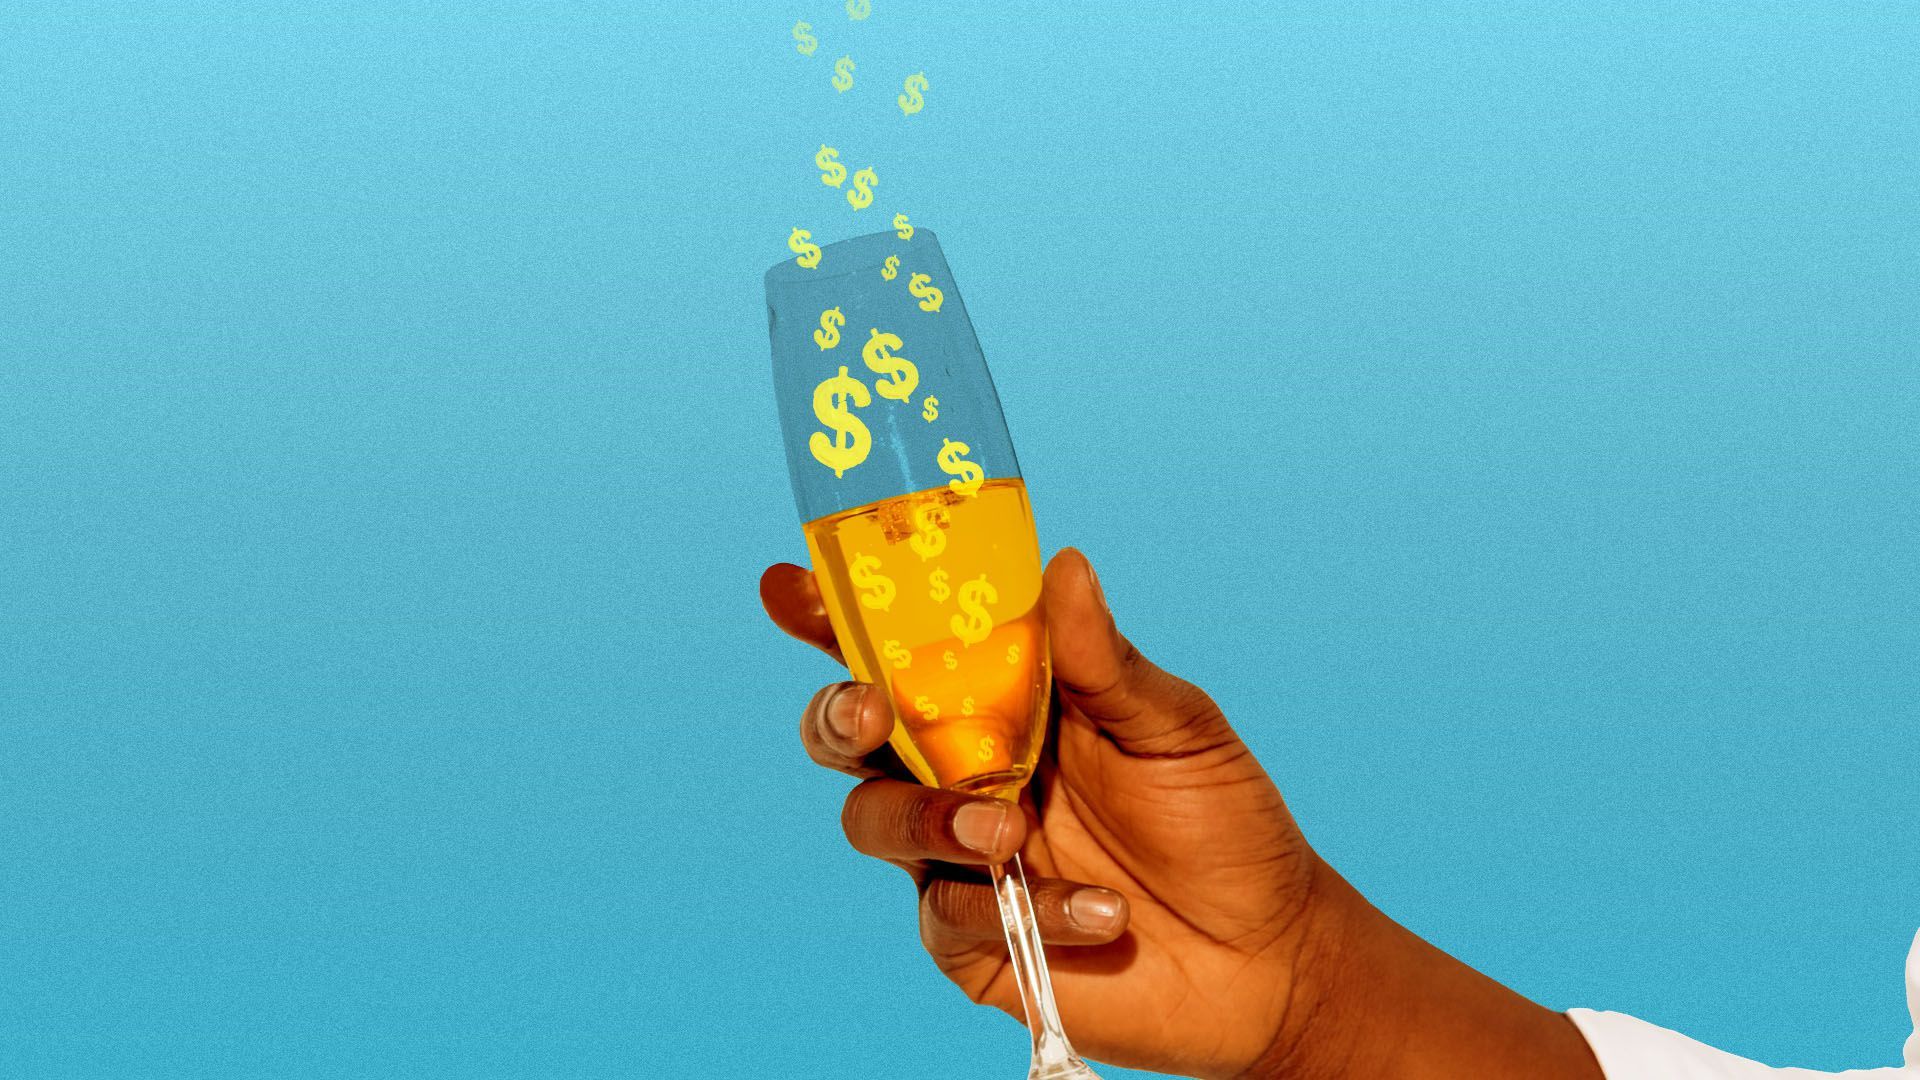 Illustration of a hand holding up a champagne glass with dollar sign bubbles